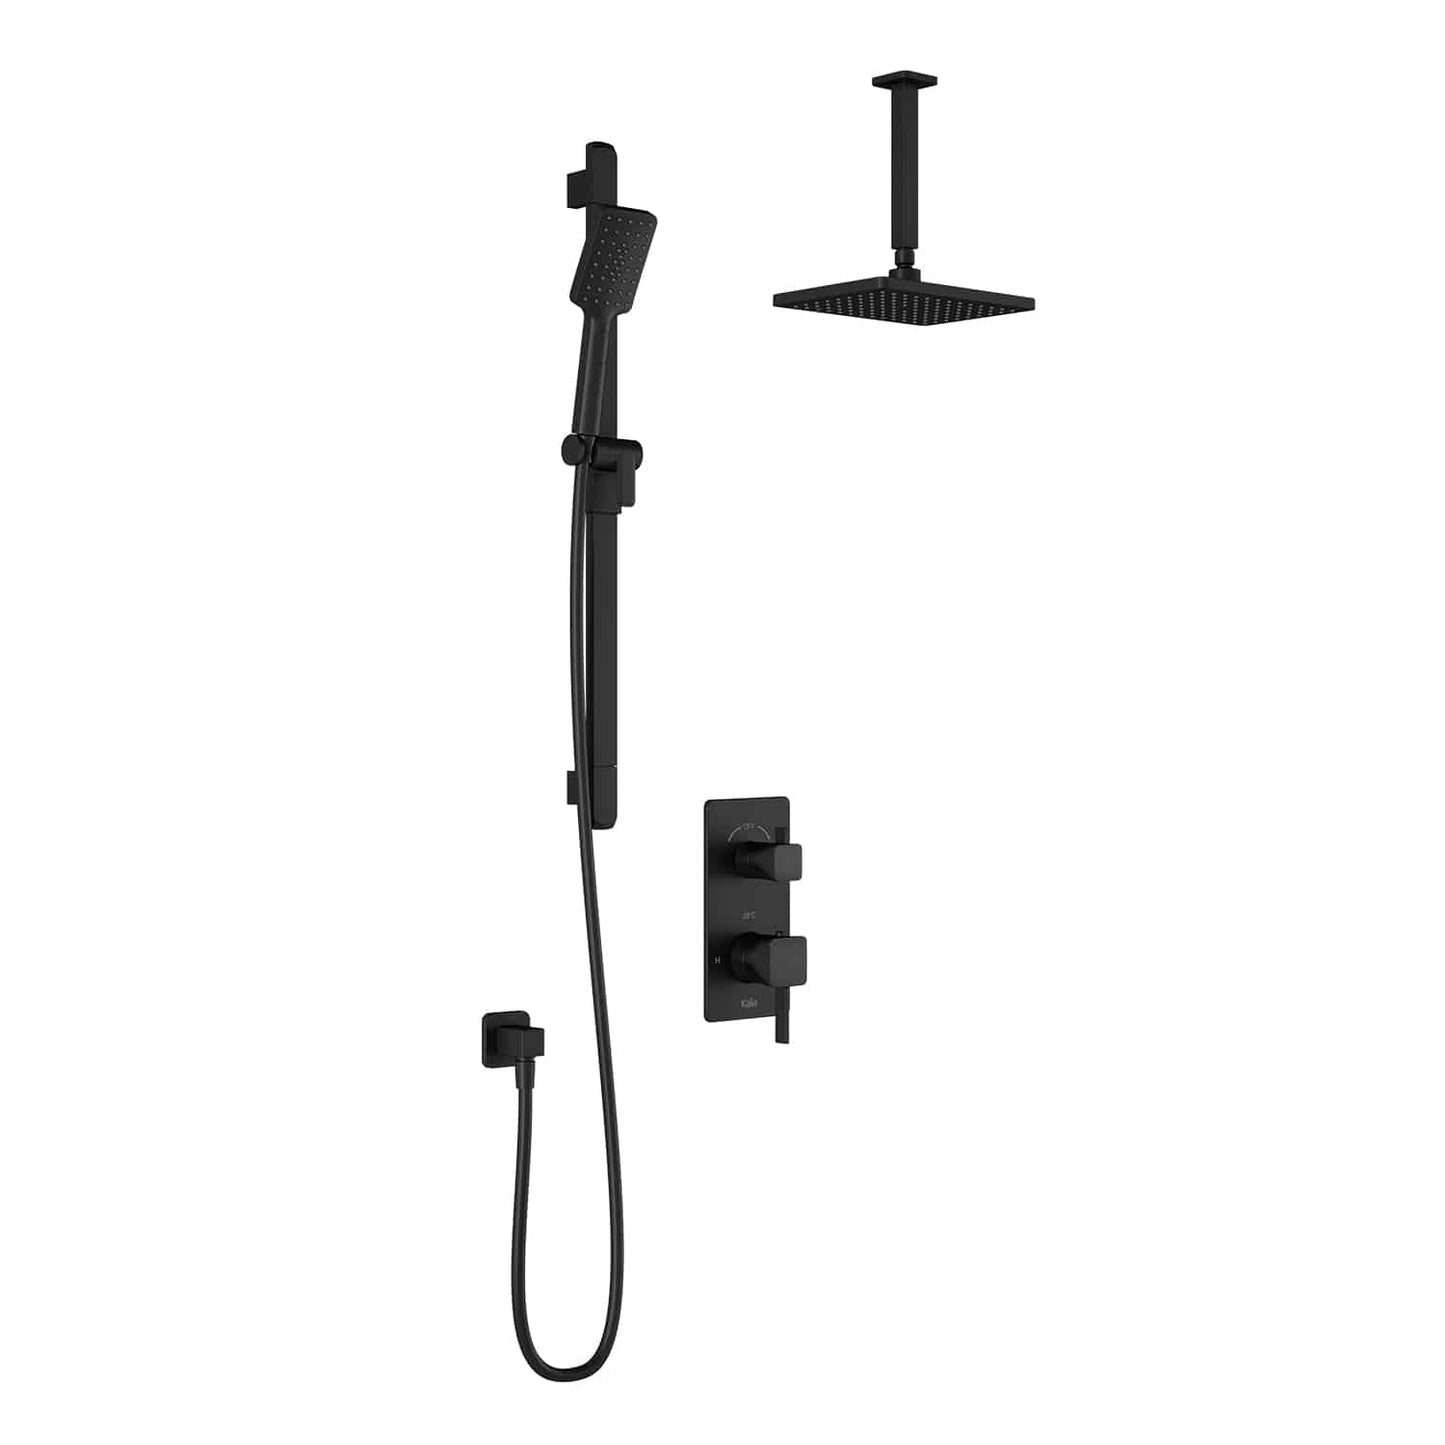 Kalia SquareOne TD2 AQUATONIK T/P with Diverter Shower System with 10-1/4" Shower Head with Vertical Ceiling Arm- Matte Black